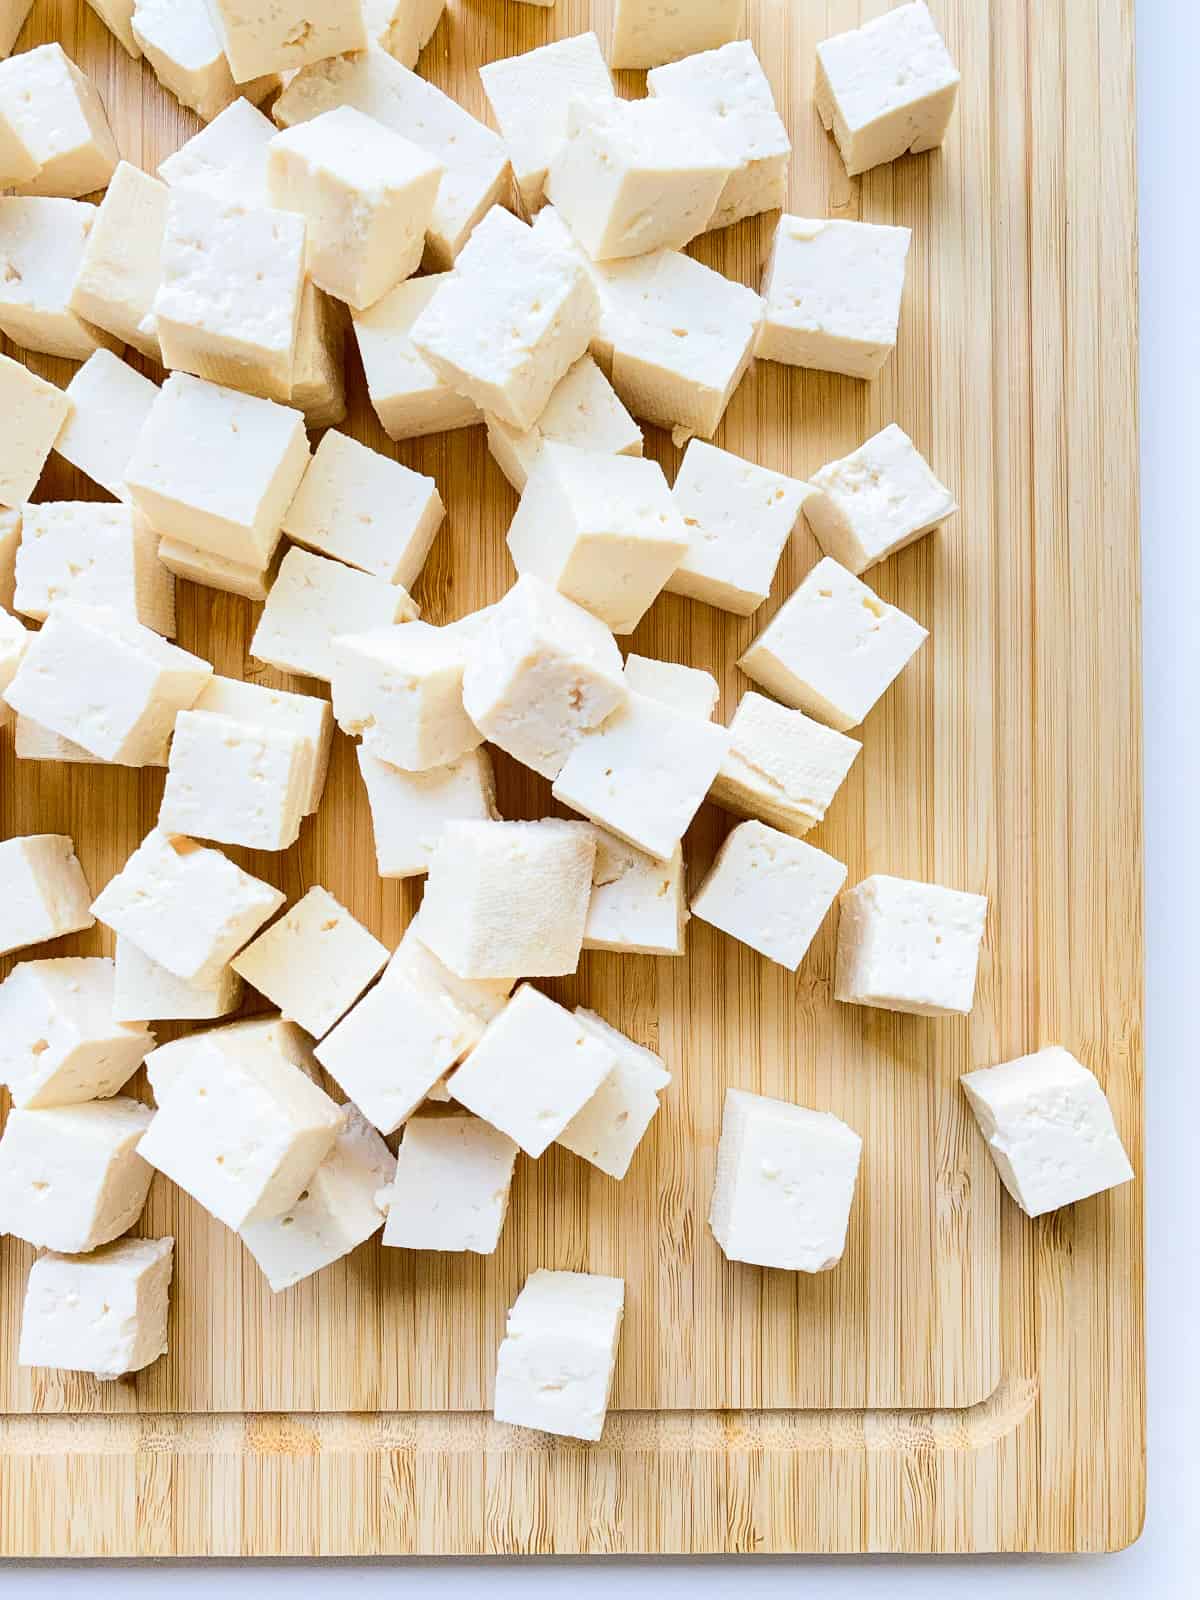 An image of tofu cubes on a bamboo cutting board.